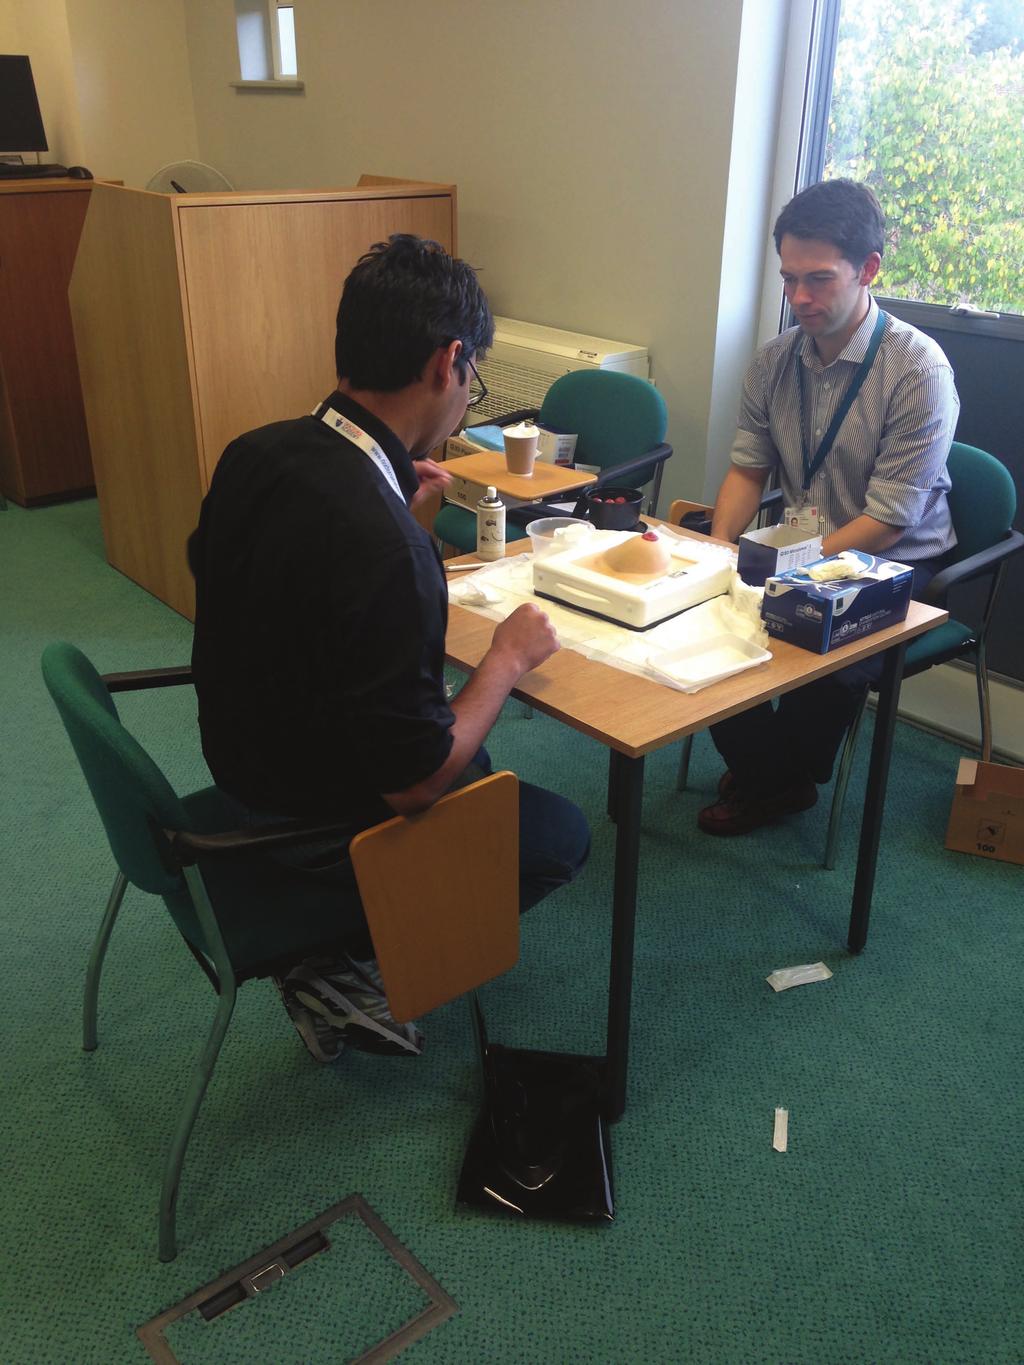 THE EDINBURGH MRCS OSCE PREPARATION COURSE (MANCHESTER) This course was designed to help improve a candidates' performance in the MRCS Part B examination via practice sessions with 'mock' MRCS OSCE